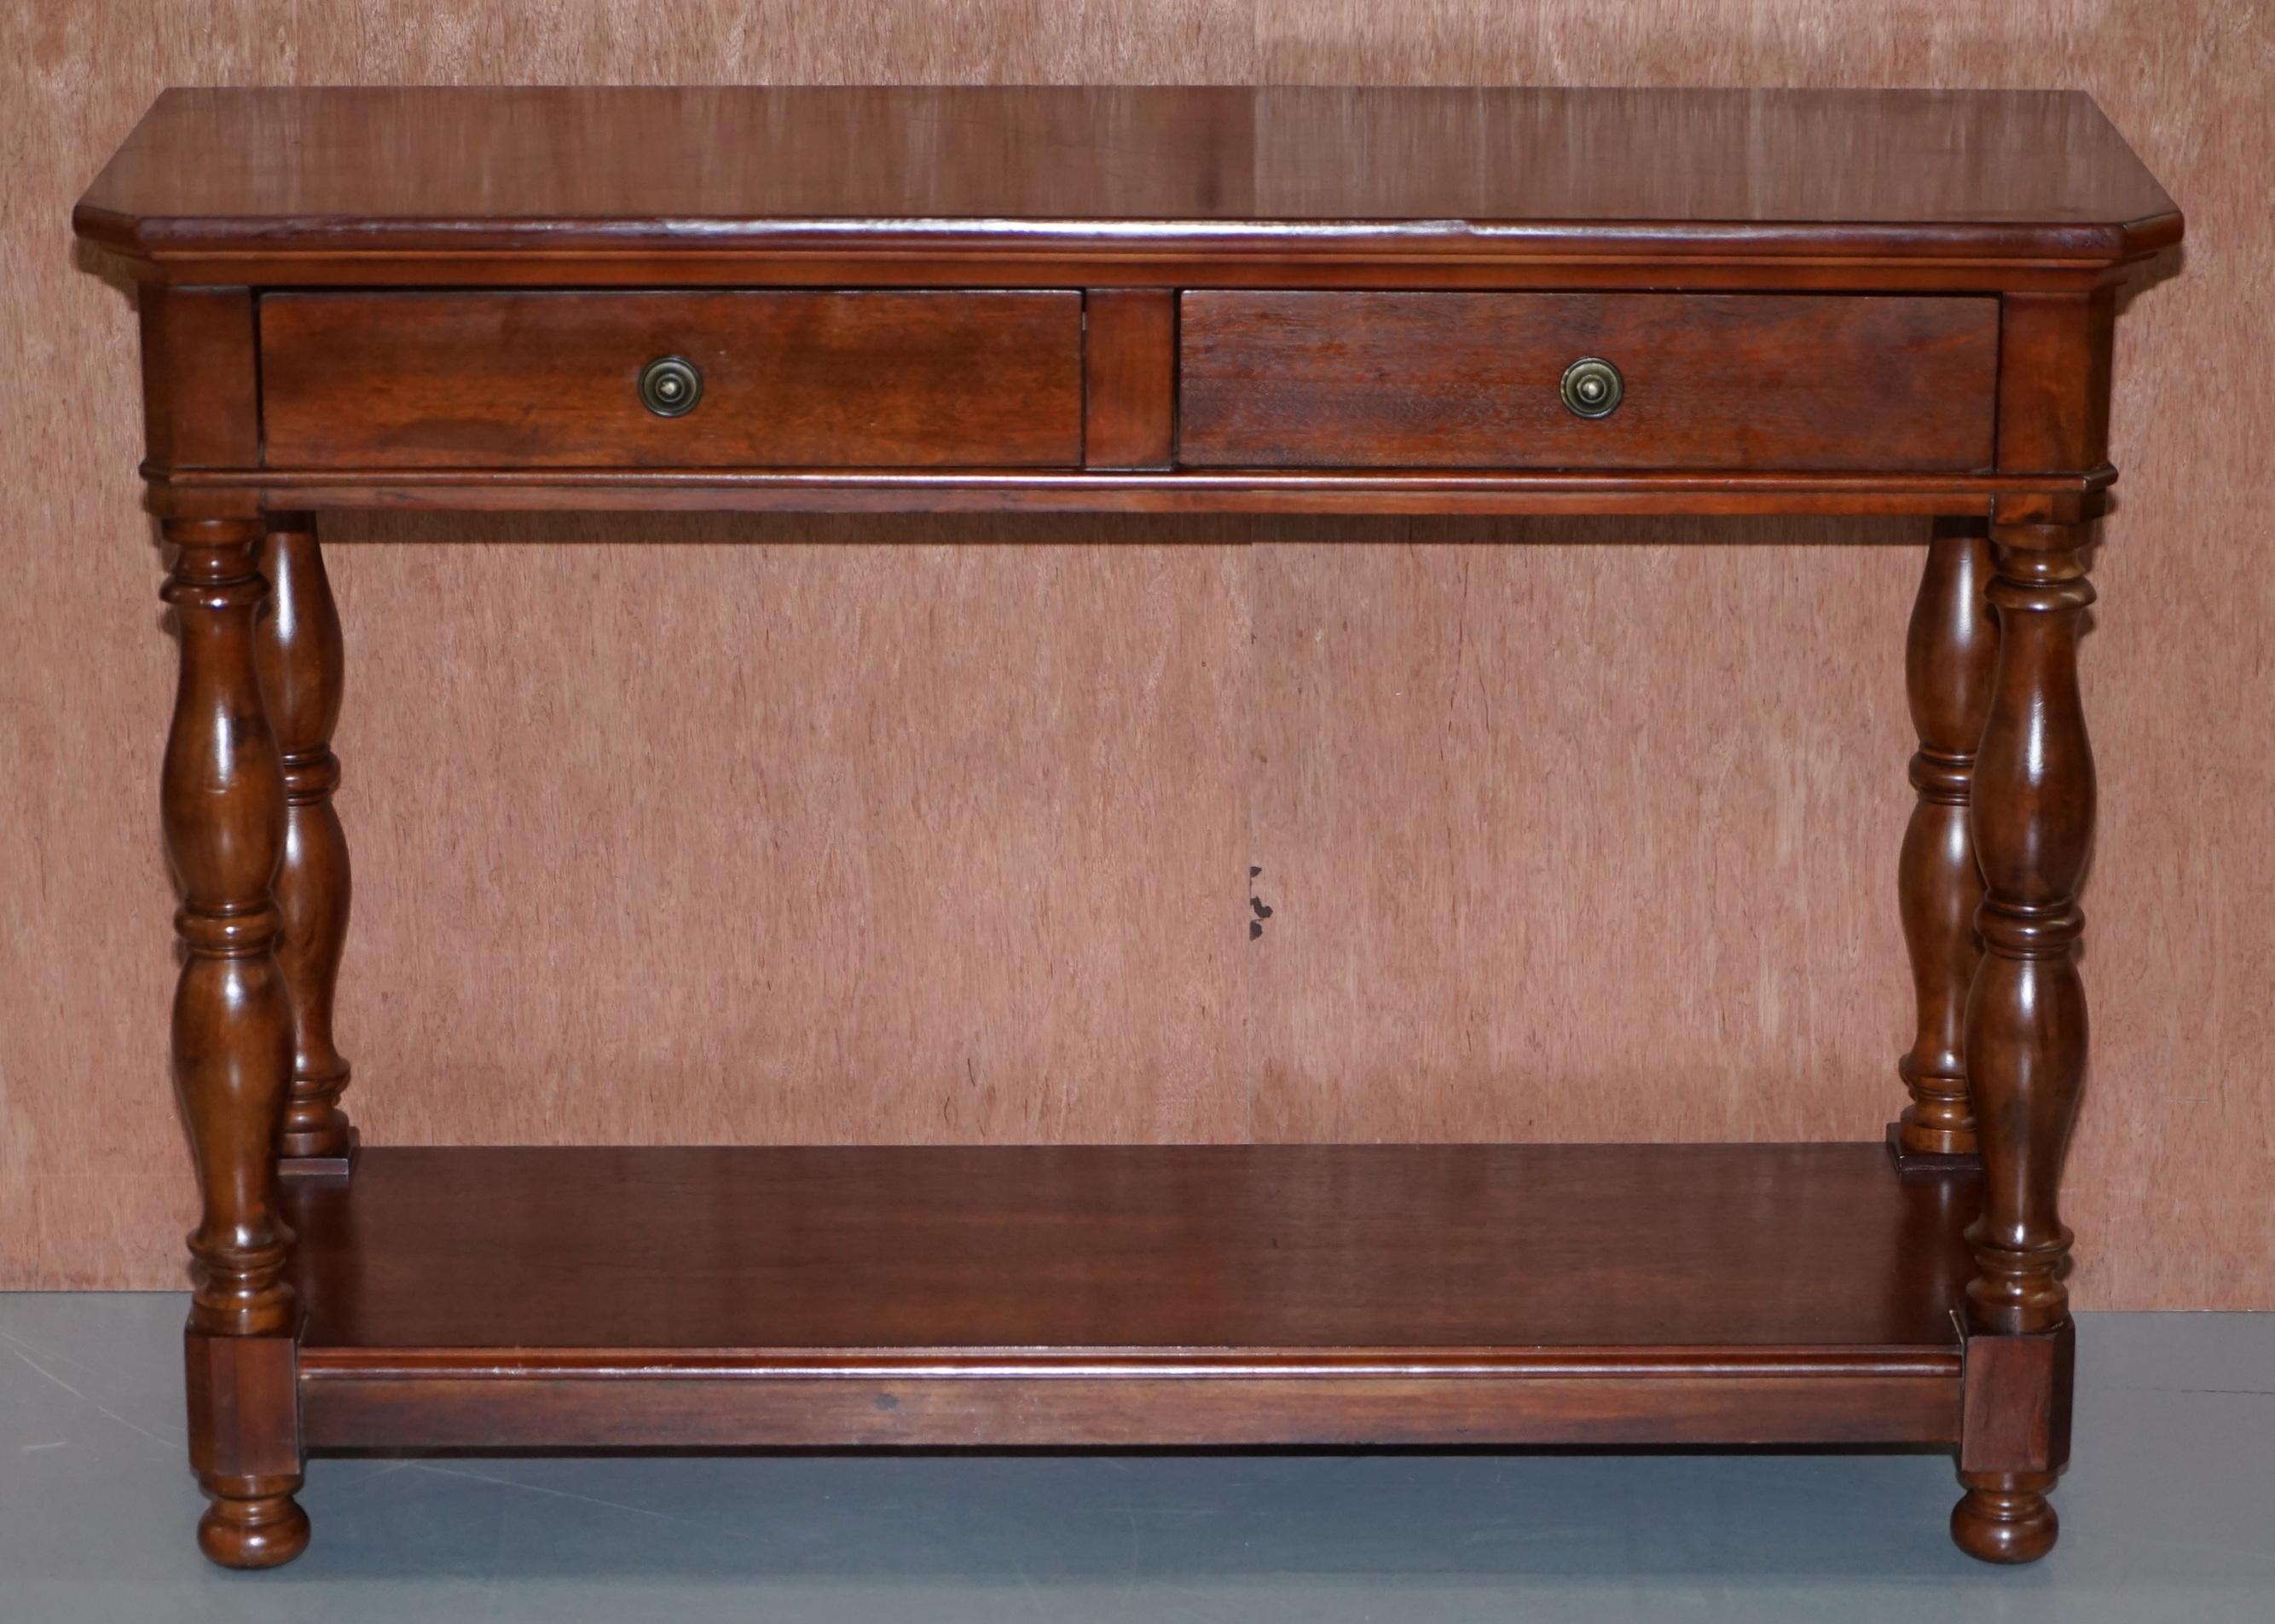 We are delighted to offer for sale this lovely Ralph Lauren light American mahogany twin drawer sideboard

A very well made, decorative and versatile piece of furniture, Ralph Lauren make very high quality pieces out of choice cuts of premium